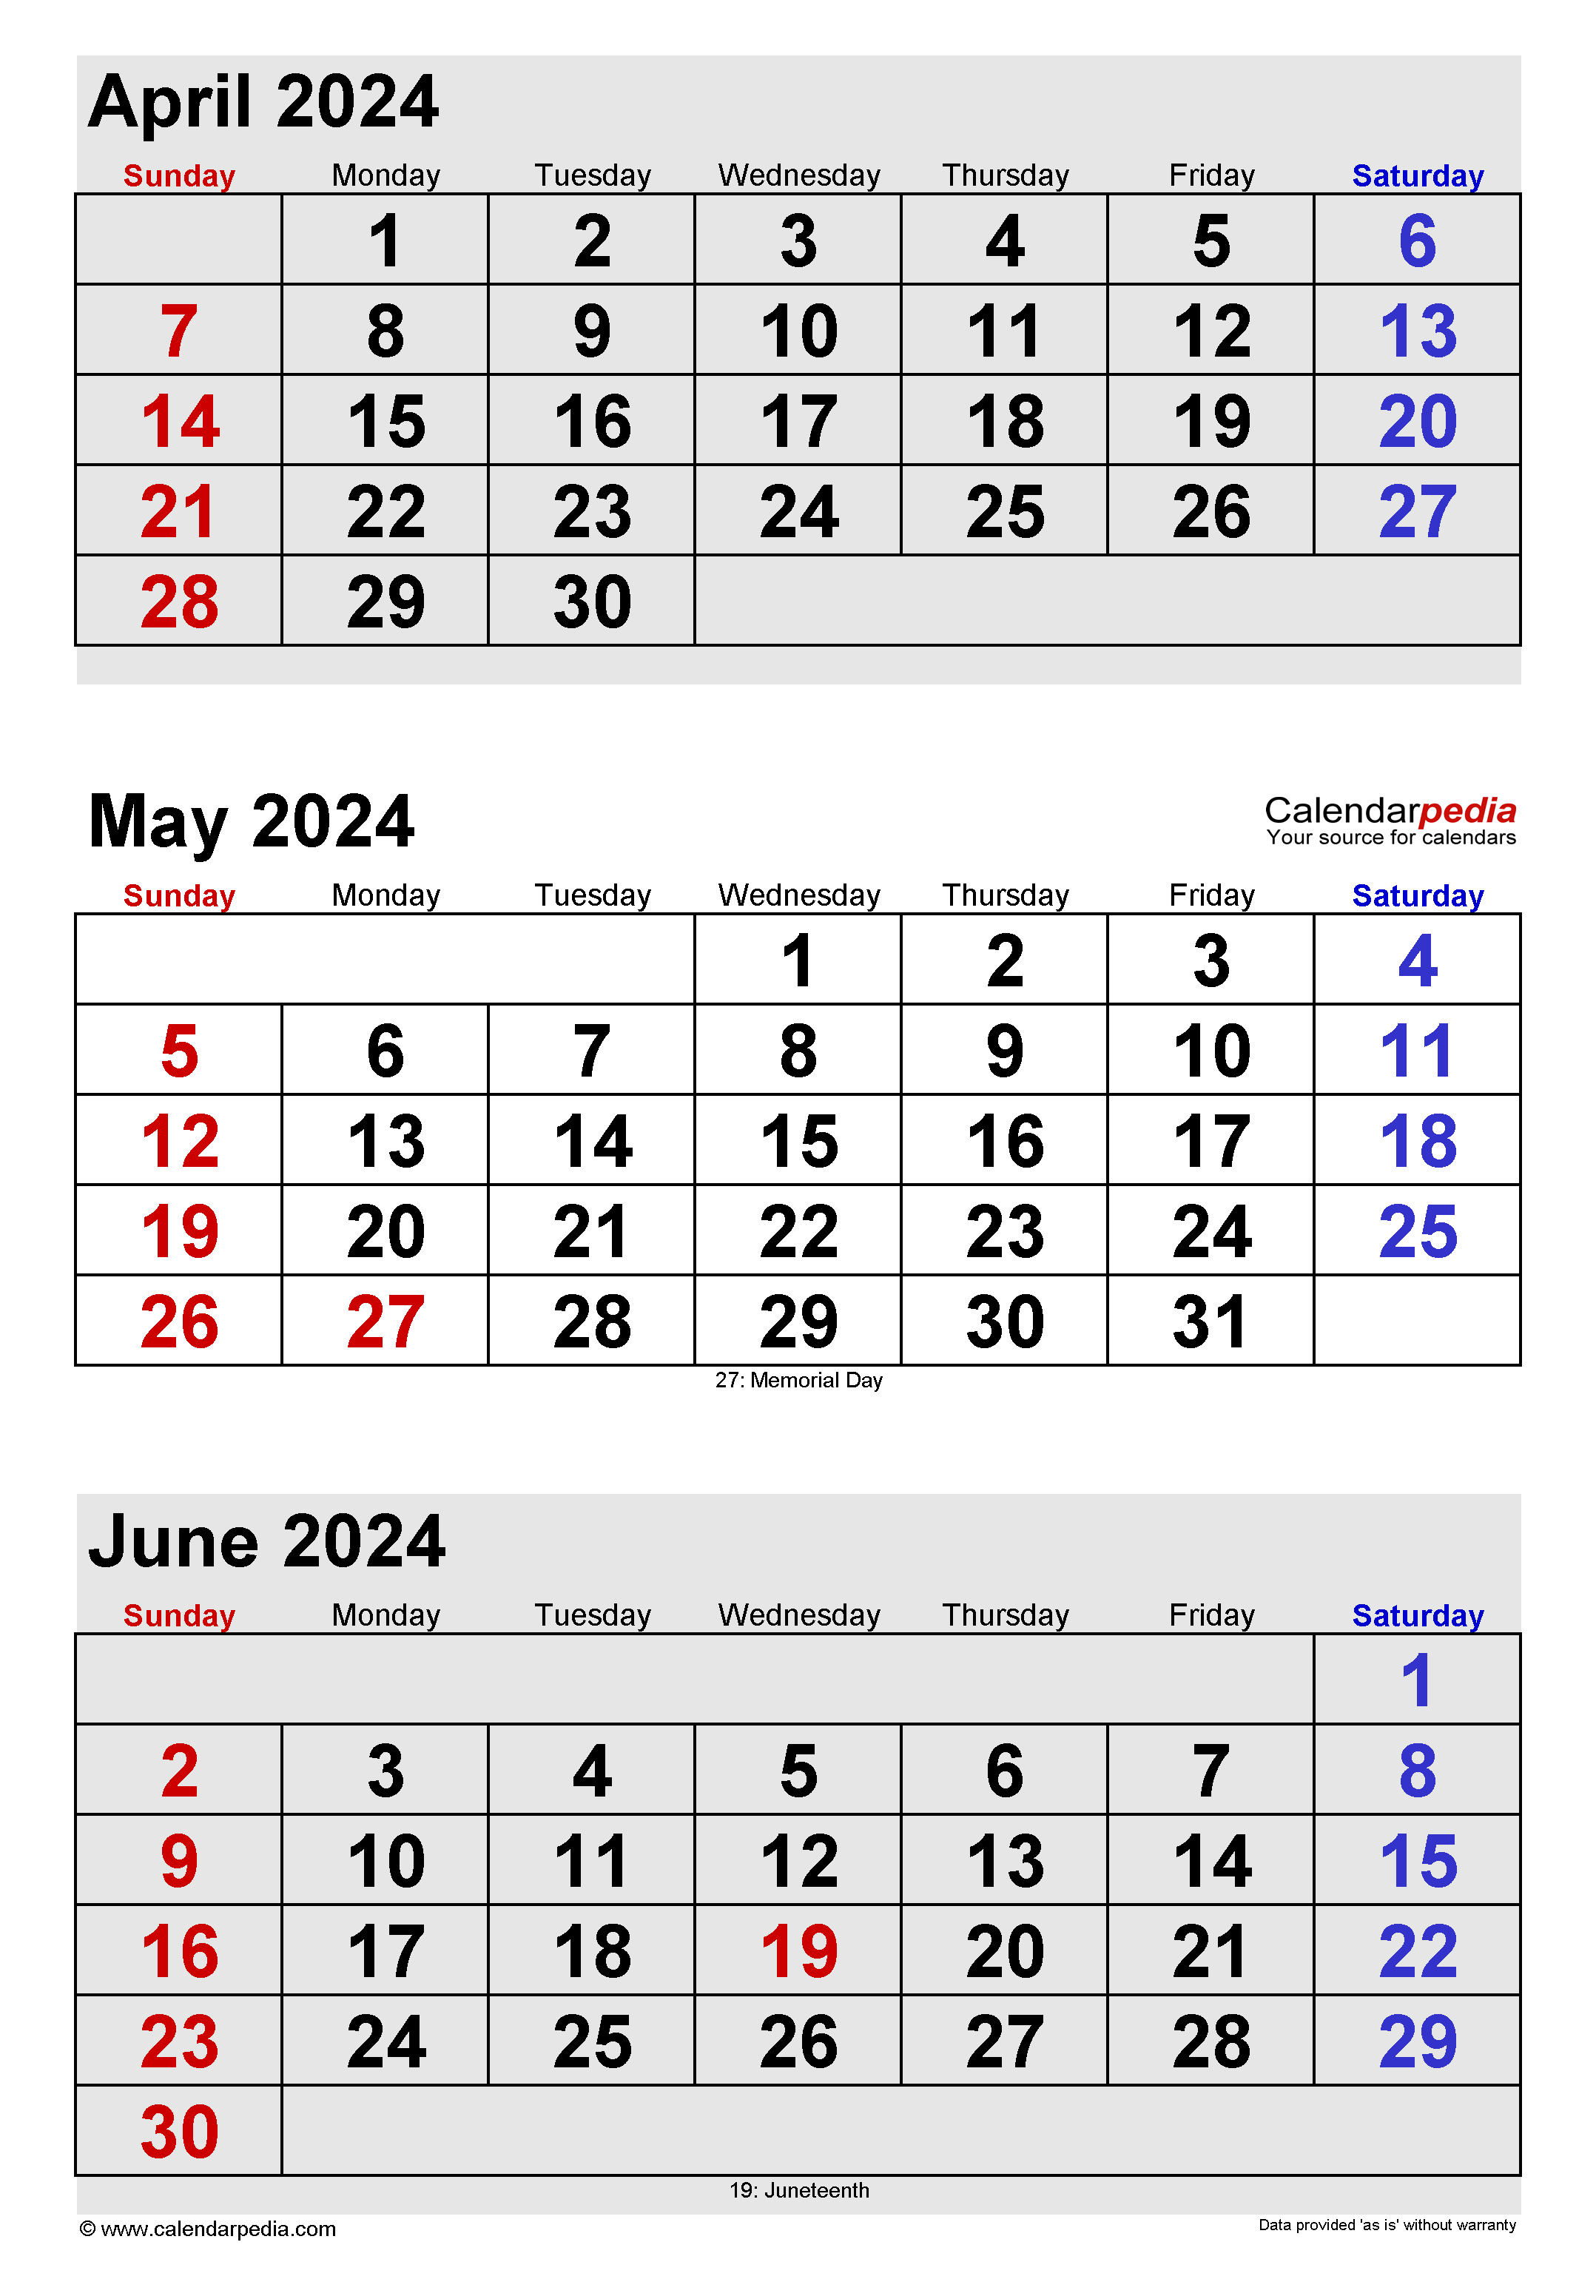 May 2024 Calendar | Templates For Word, Excel And Pdf intended for April May 2024 Calendar